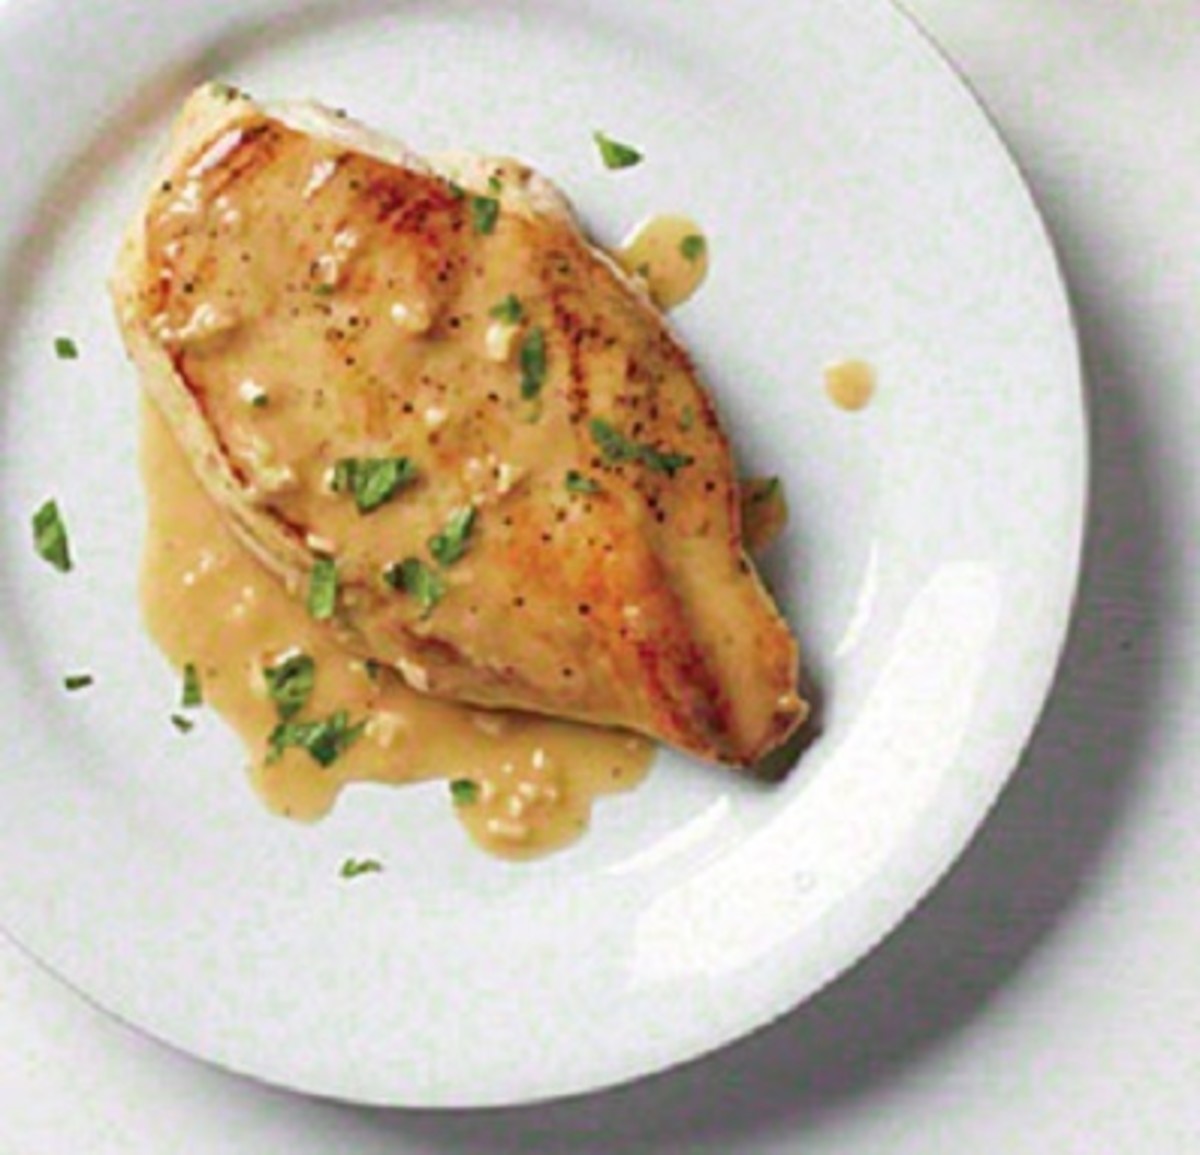 Pan-seared chicken breast with butter-rich pan sauce